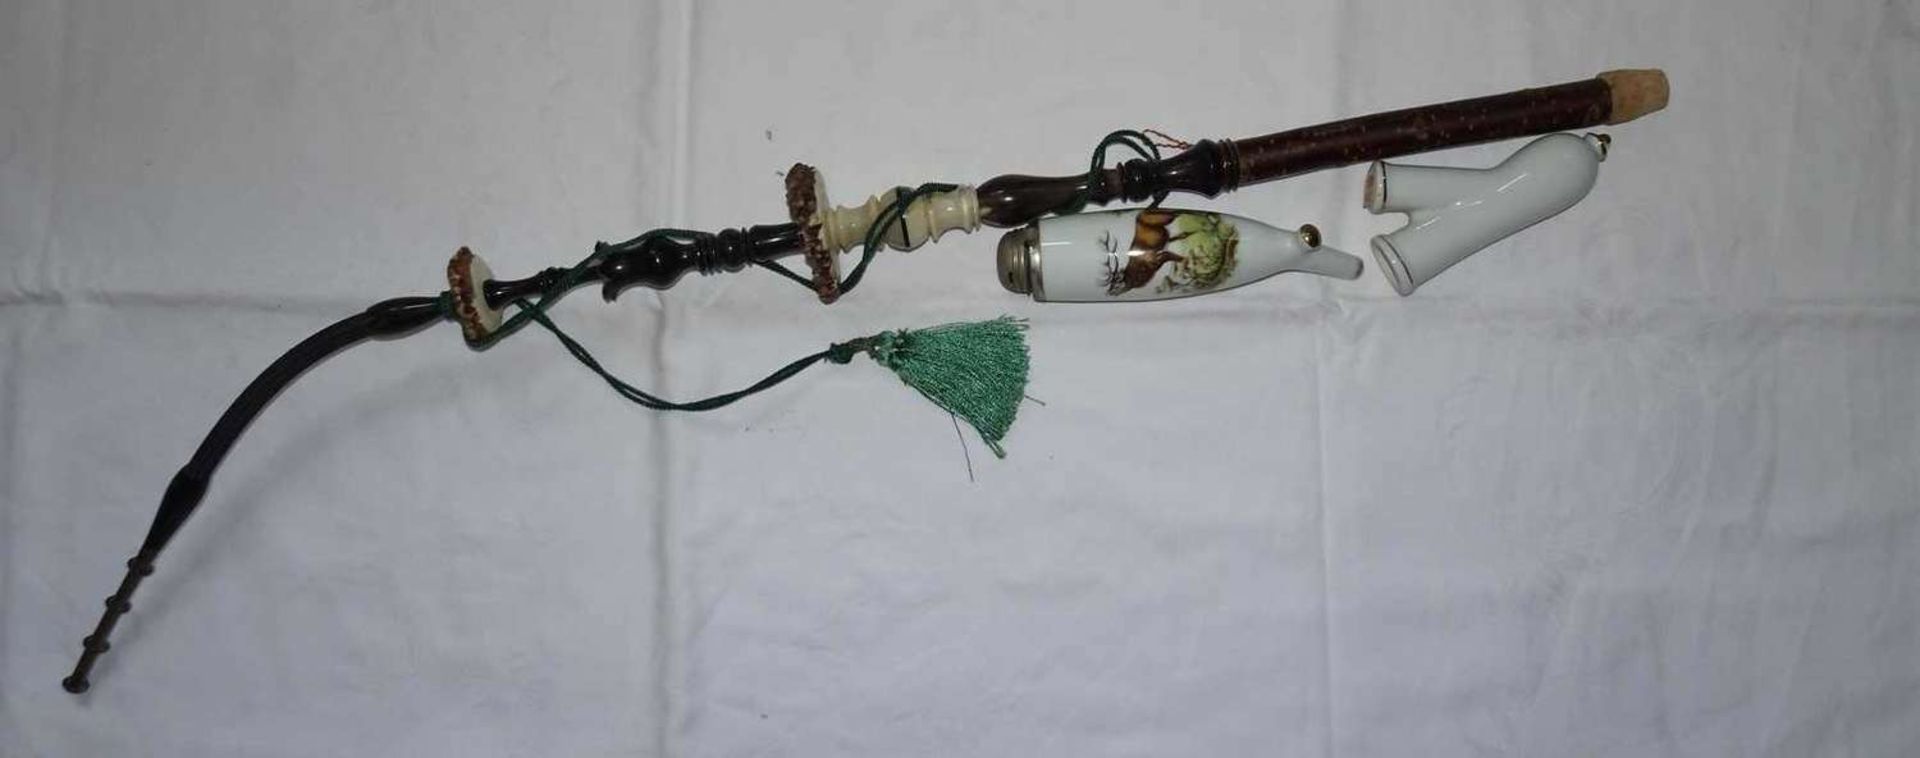 1 large whistle with porcelain head, this painted with a roaring deer. Good condition. Total